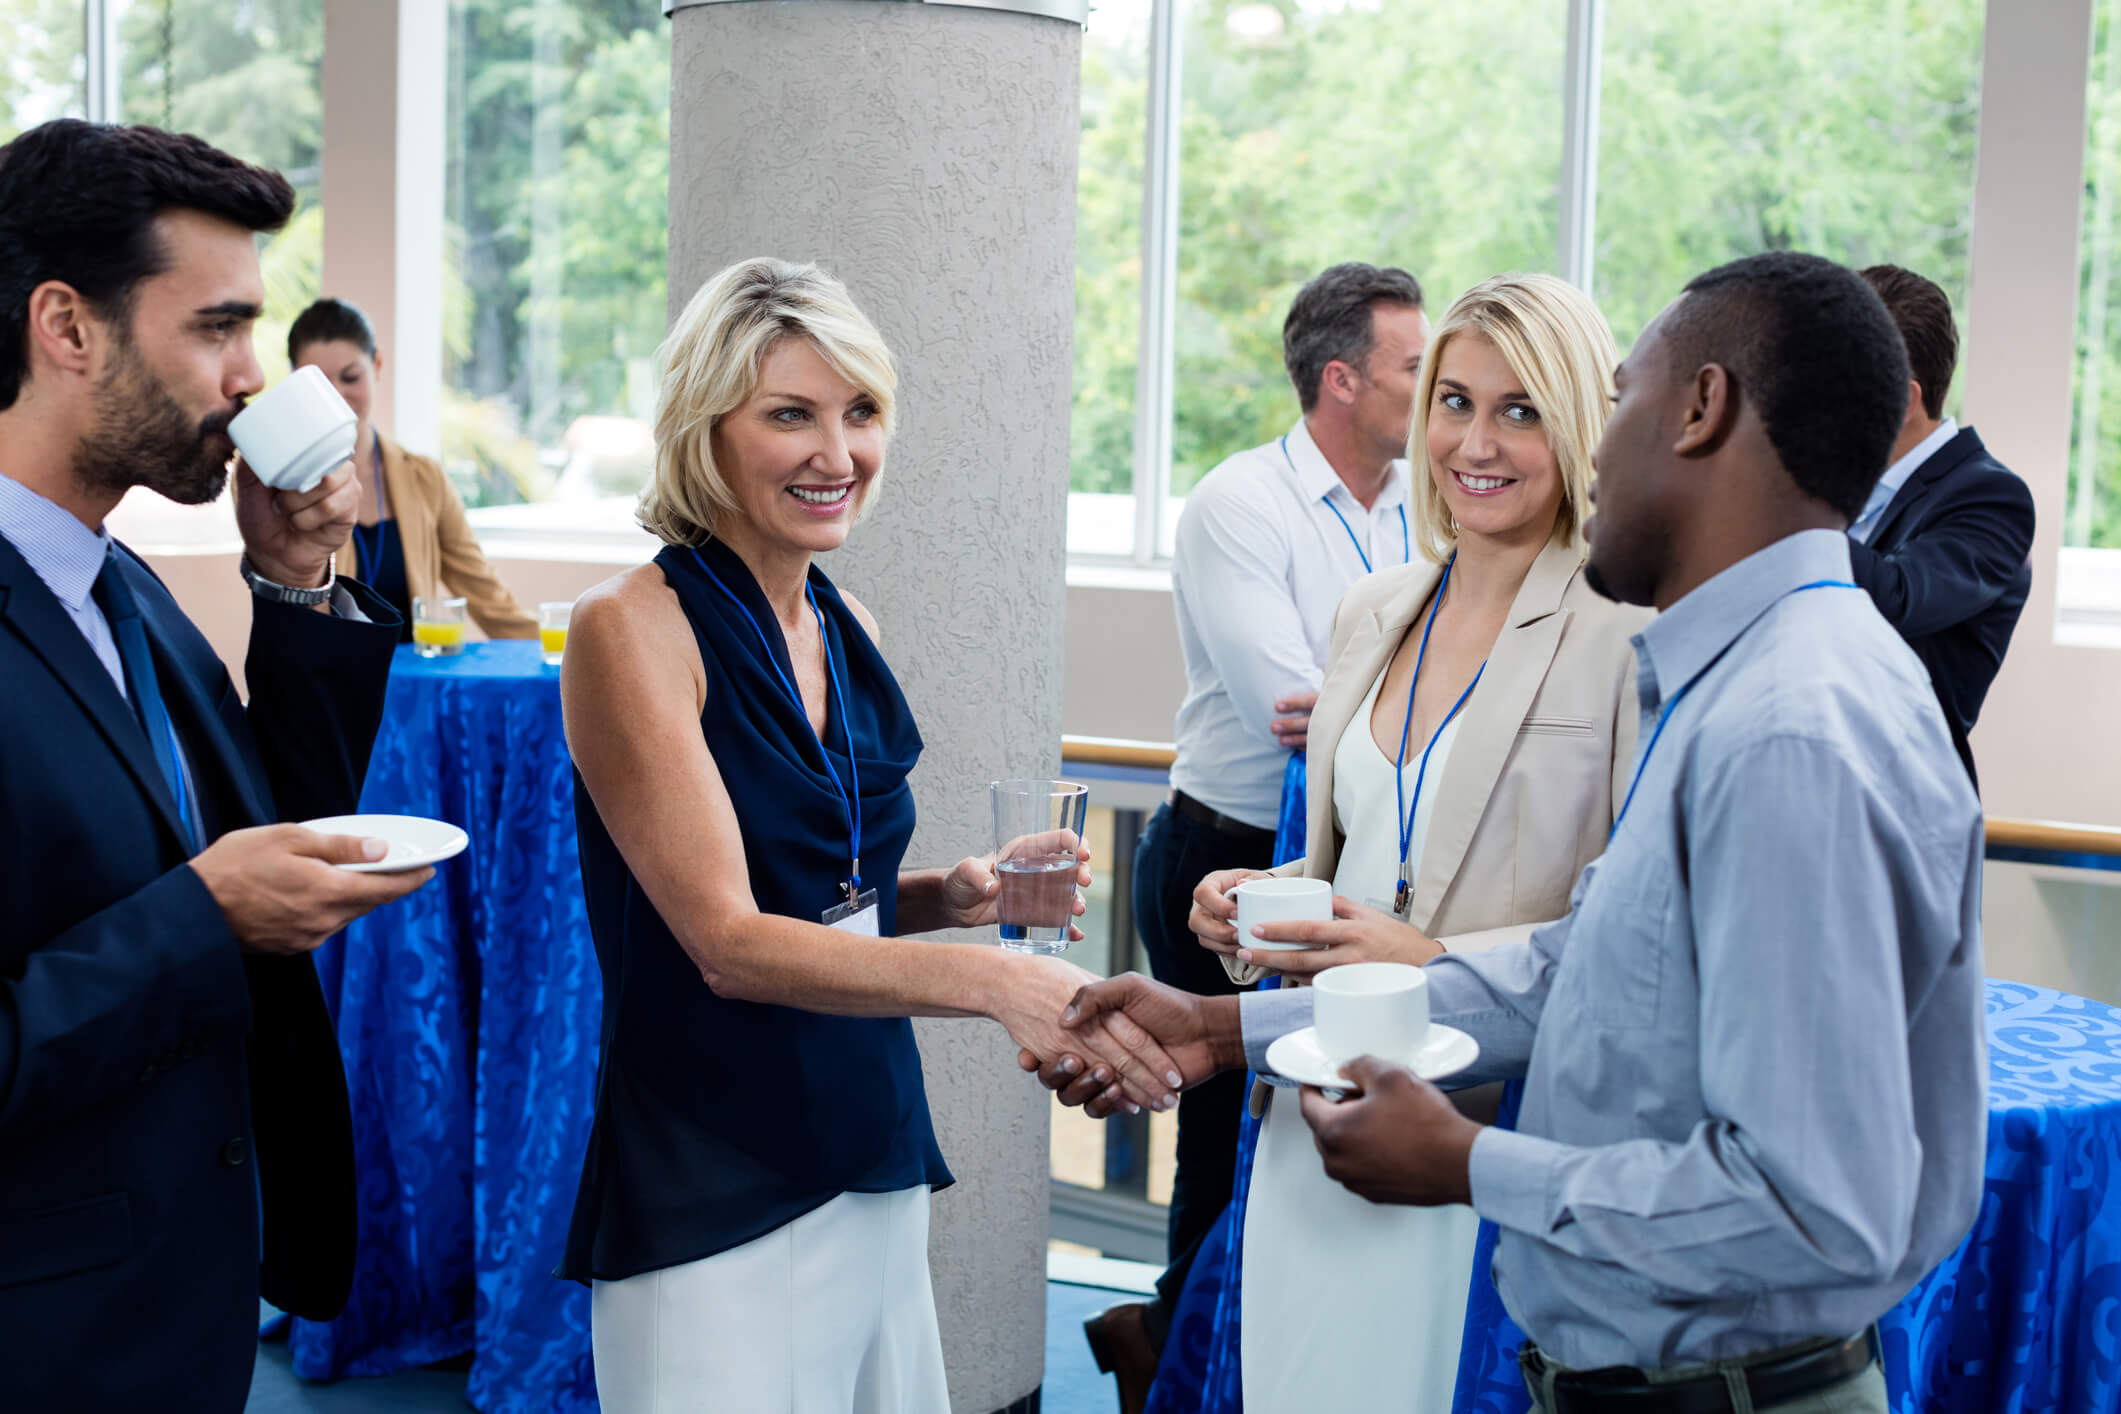 4 Tips to Maximize Your Next Association Networking Event